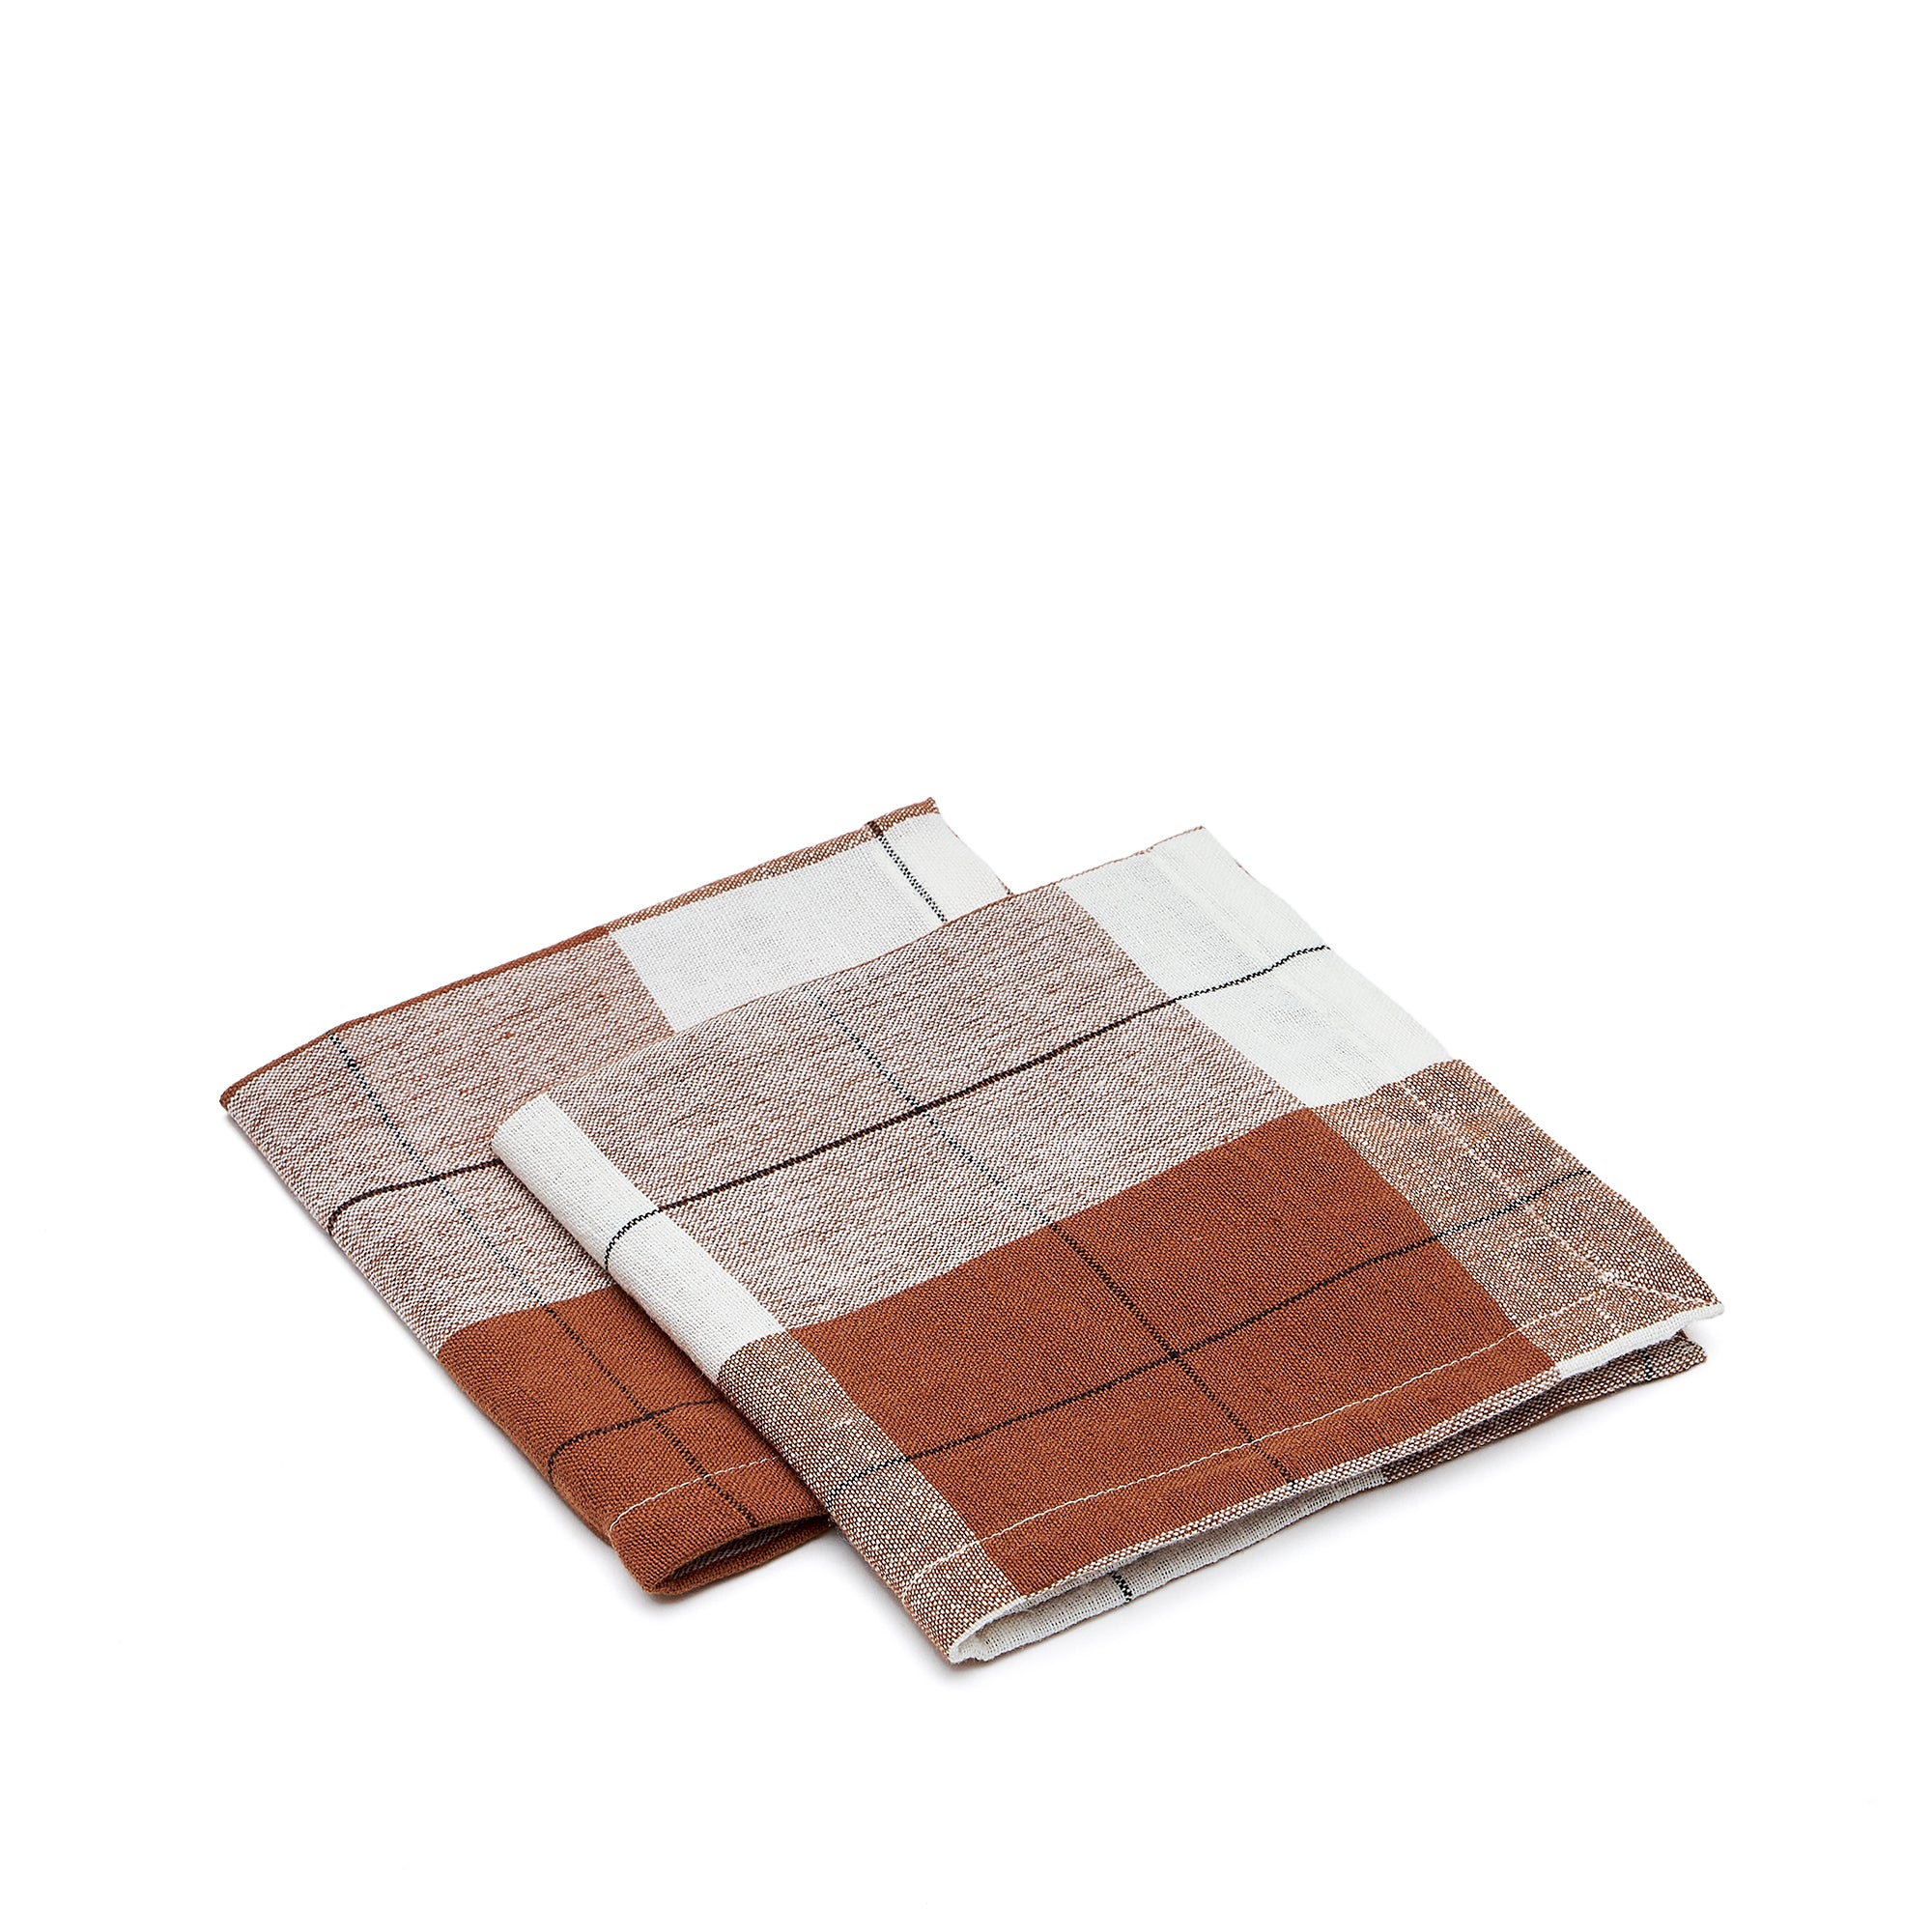 Matie set of 2 cotton and linen napkins in brown check 